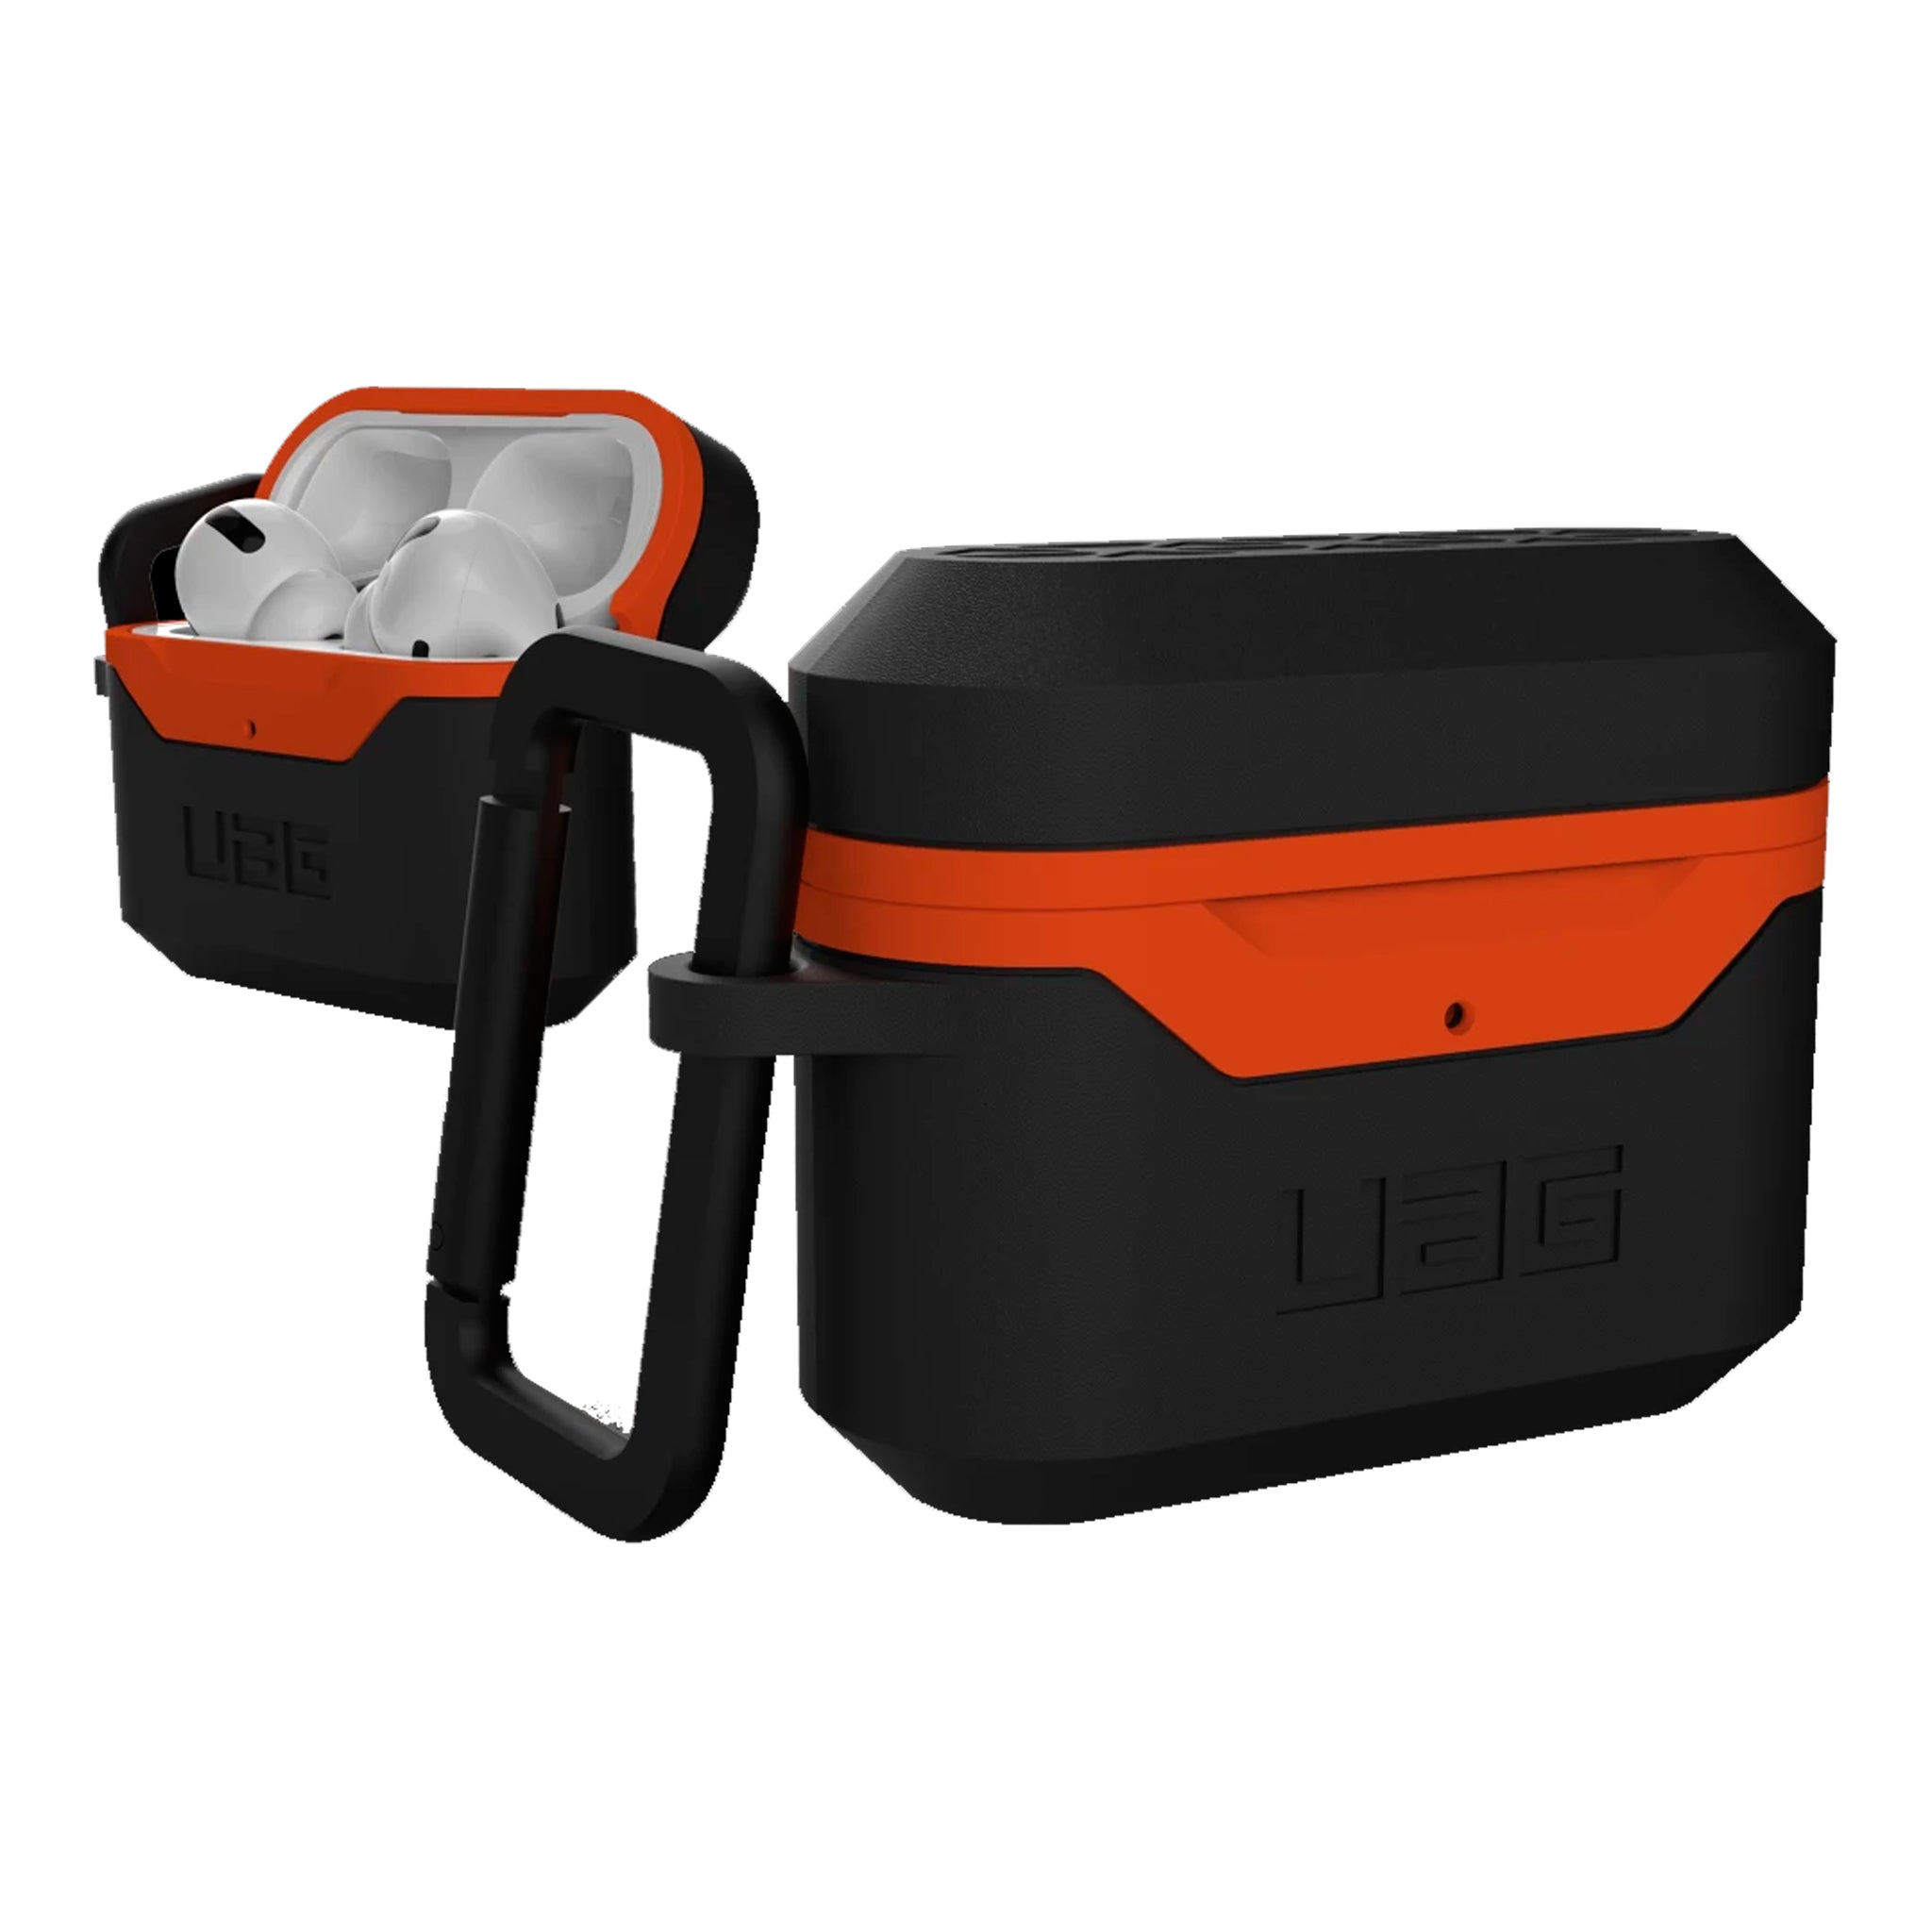 UAG - Standard Issue 001 Hard Case For Apple Airpods Pro - Black And Orange